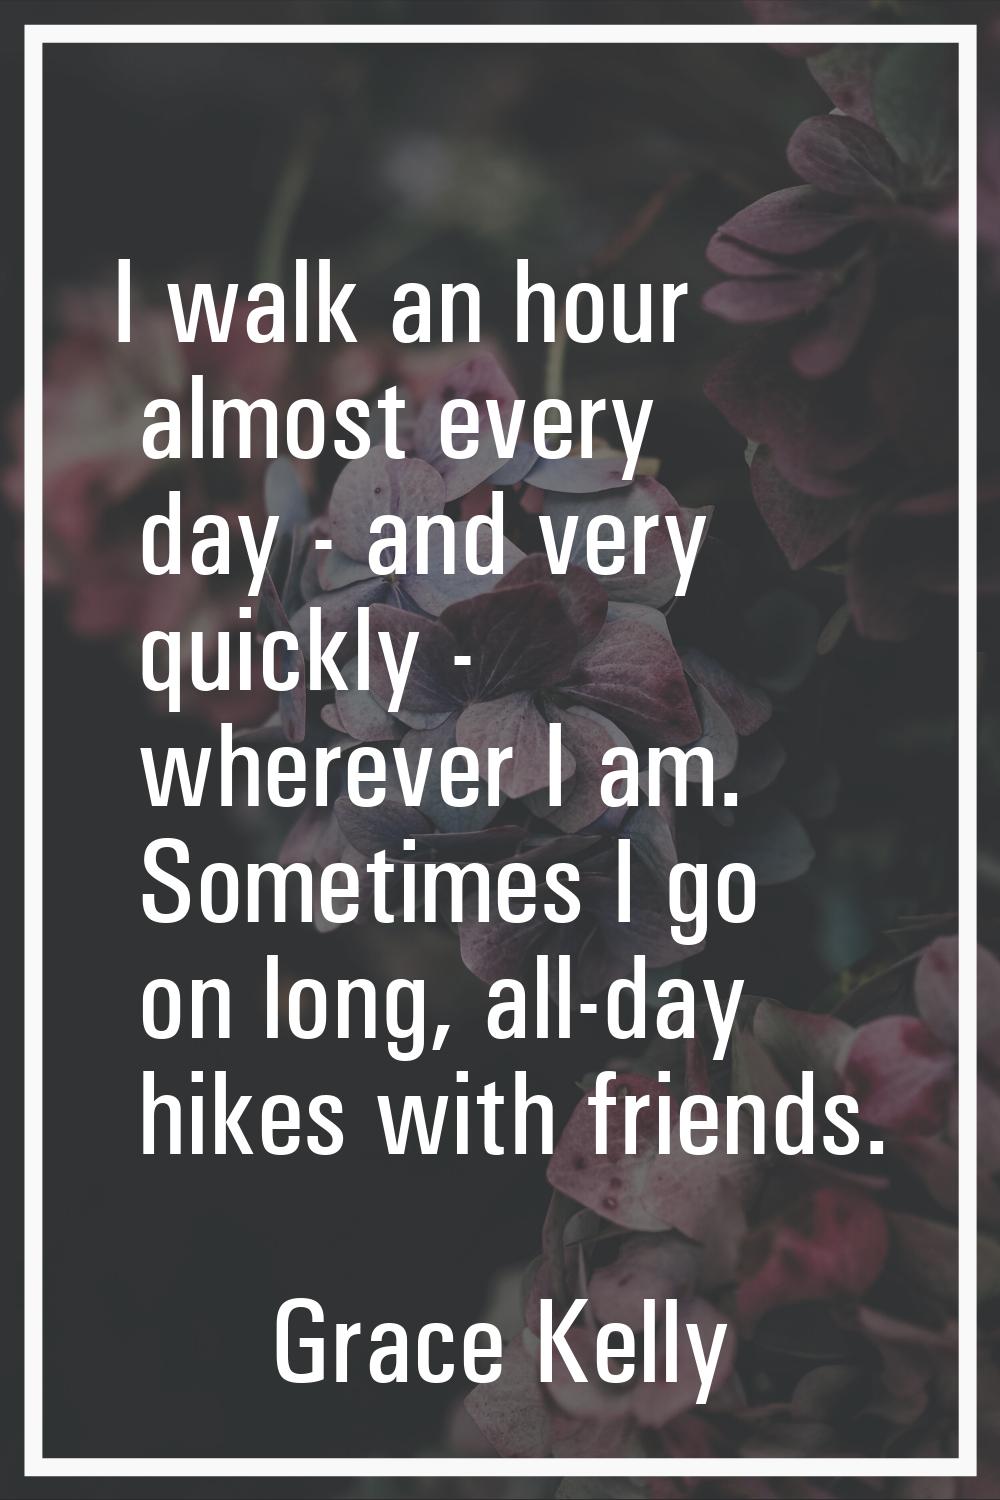 I walk an hour almost every day - and very quickly - wherever I am. Sometimes I go on long, all-day